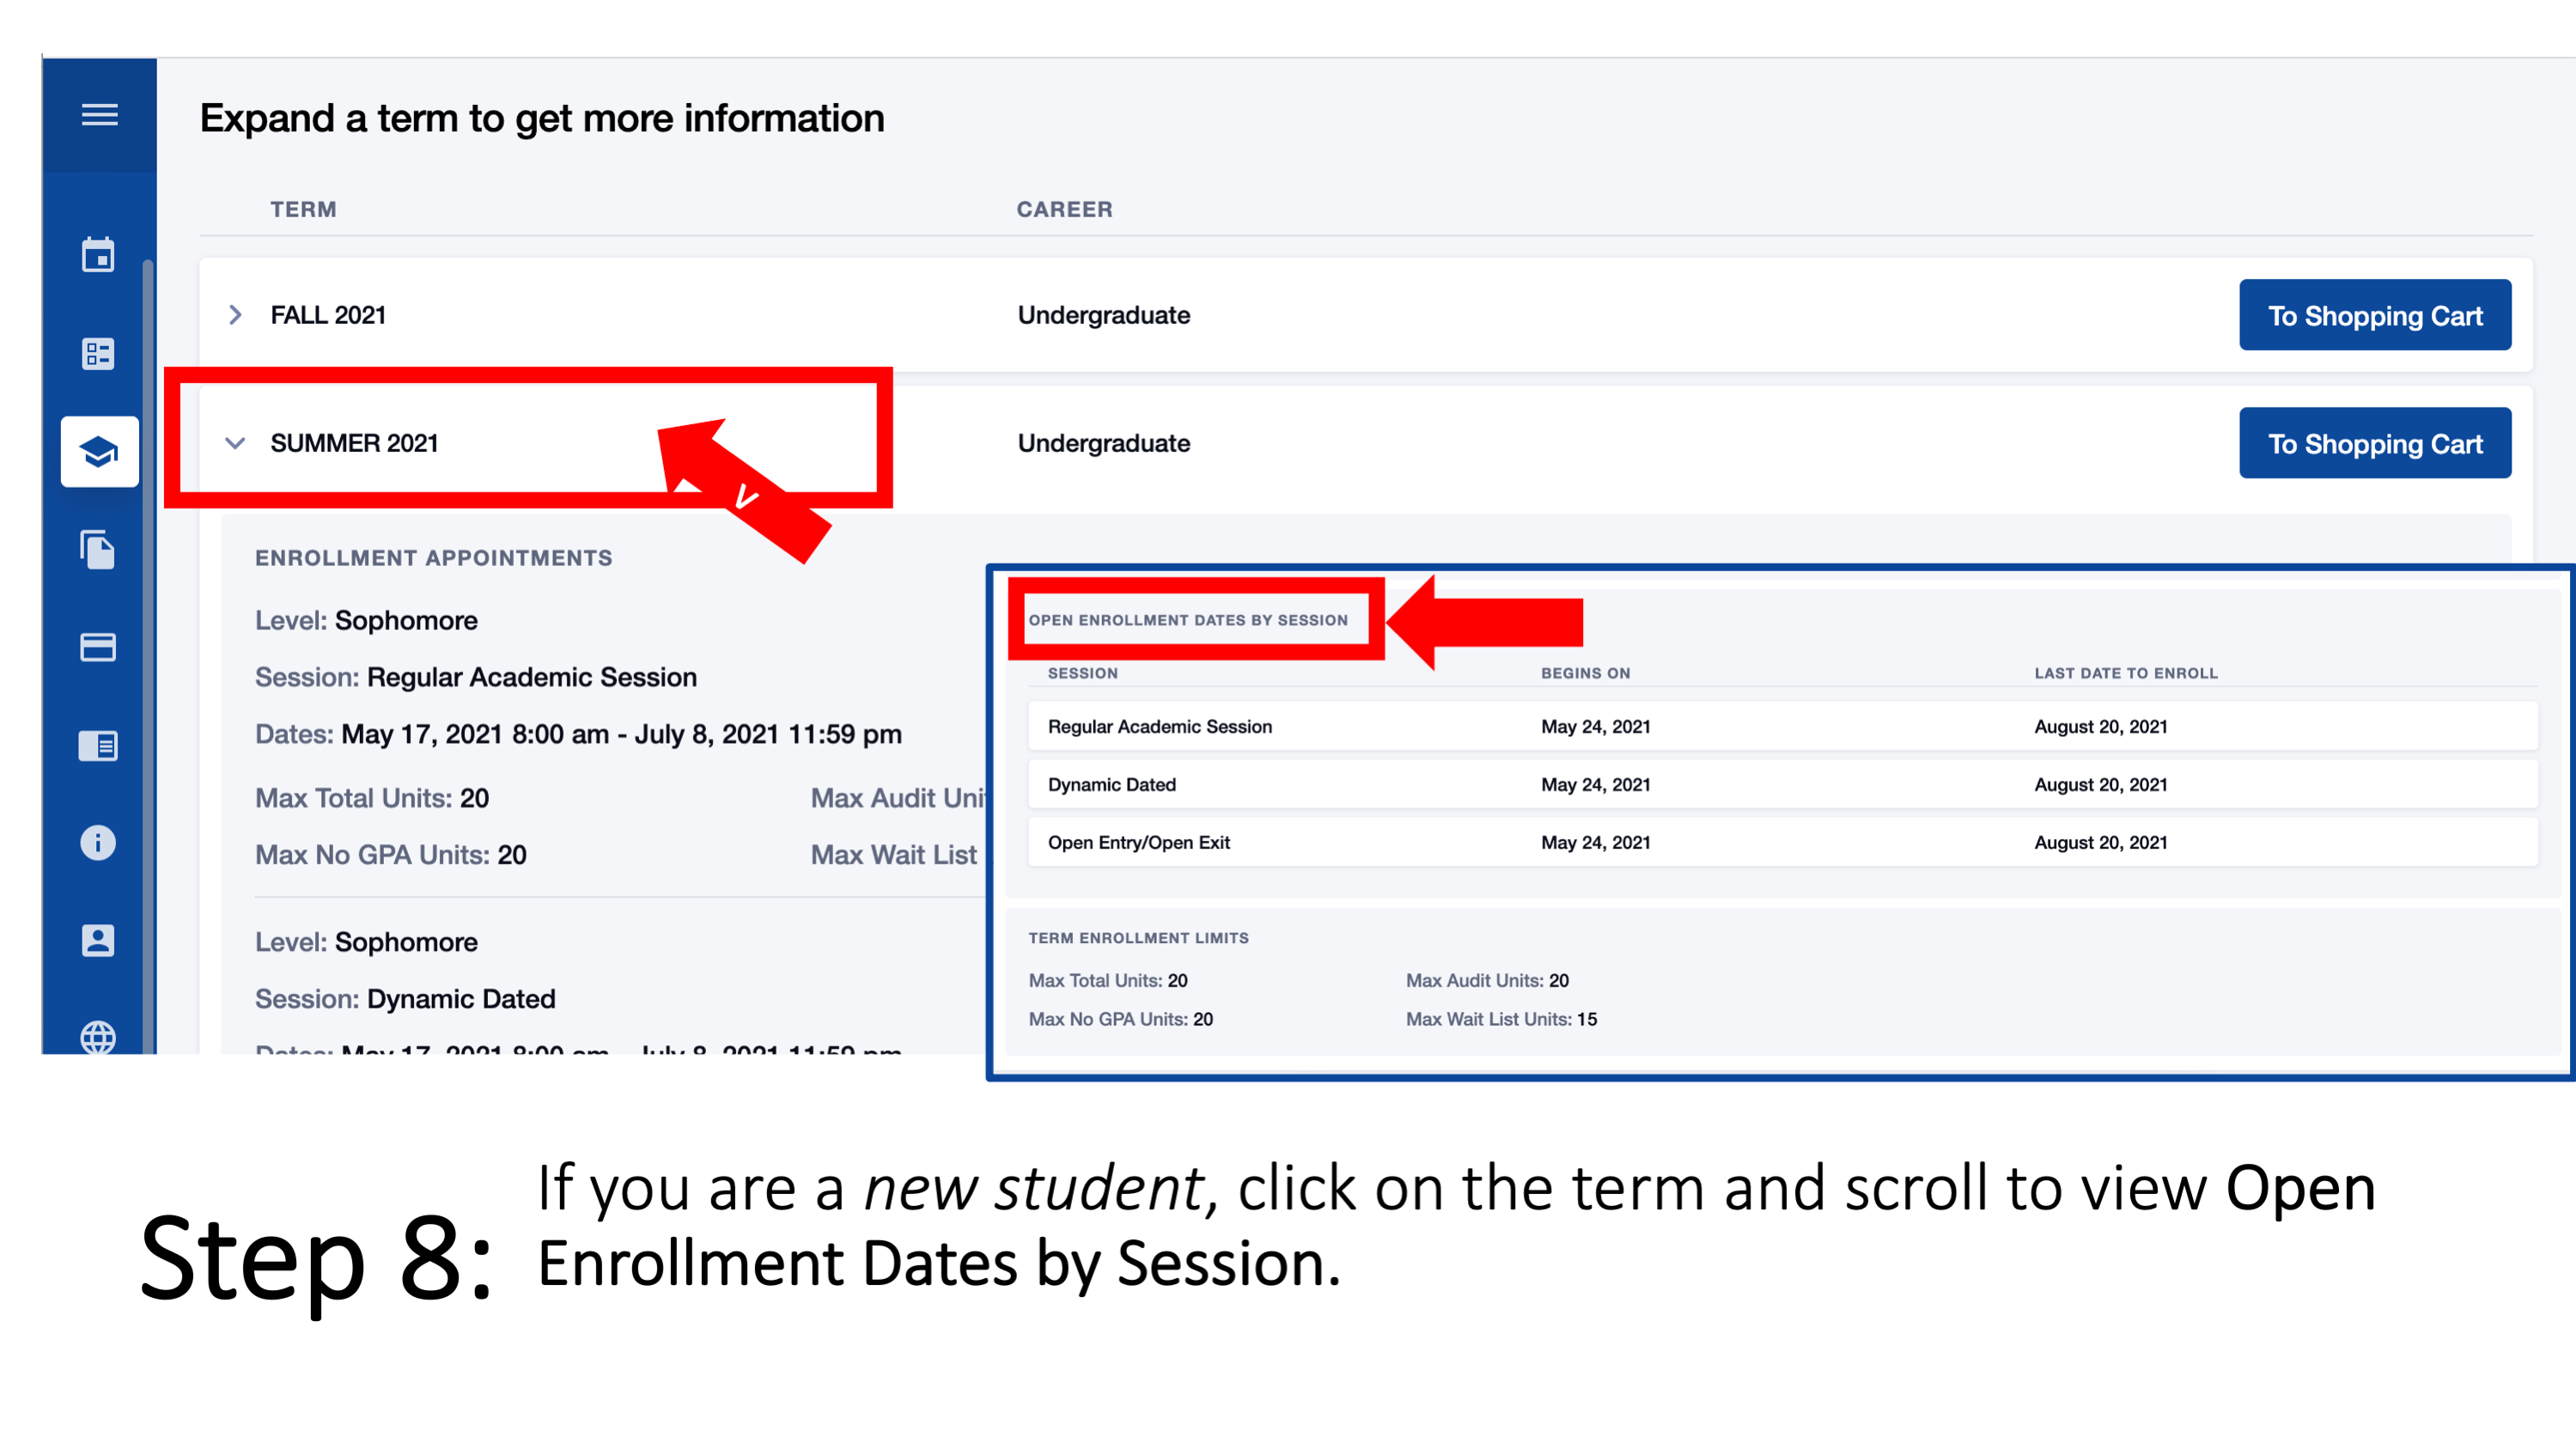 Step 8: If you are a new student, click on the term and scroll to view Open Enrollment Dates by Session.